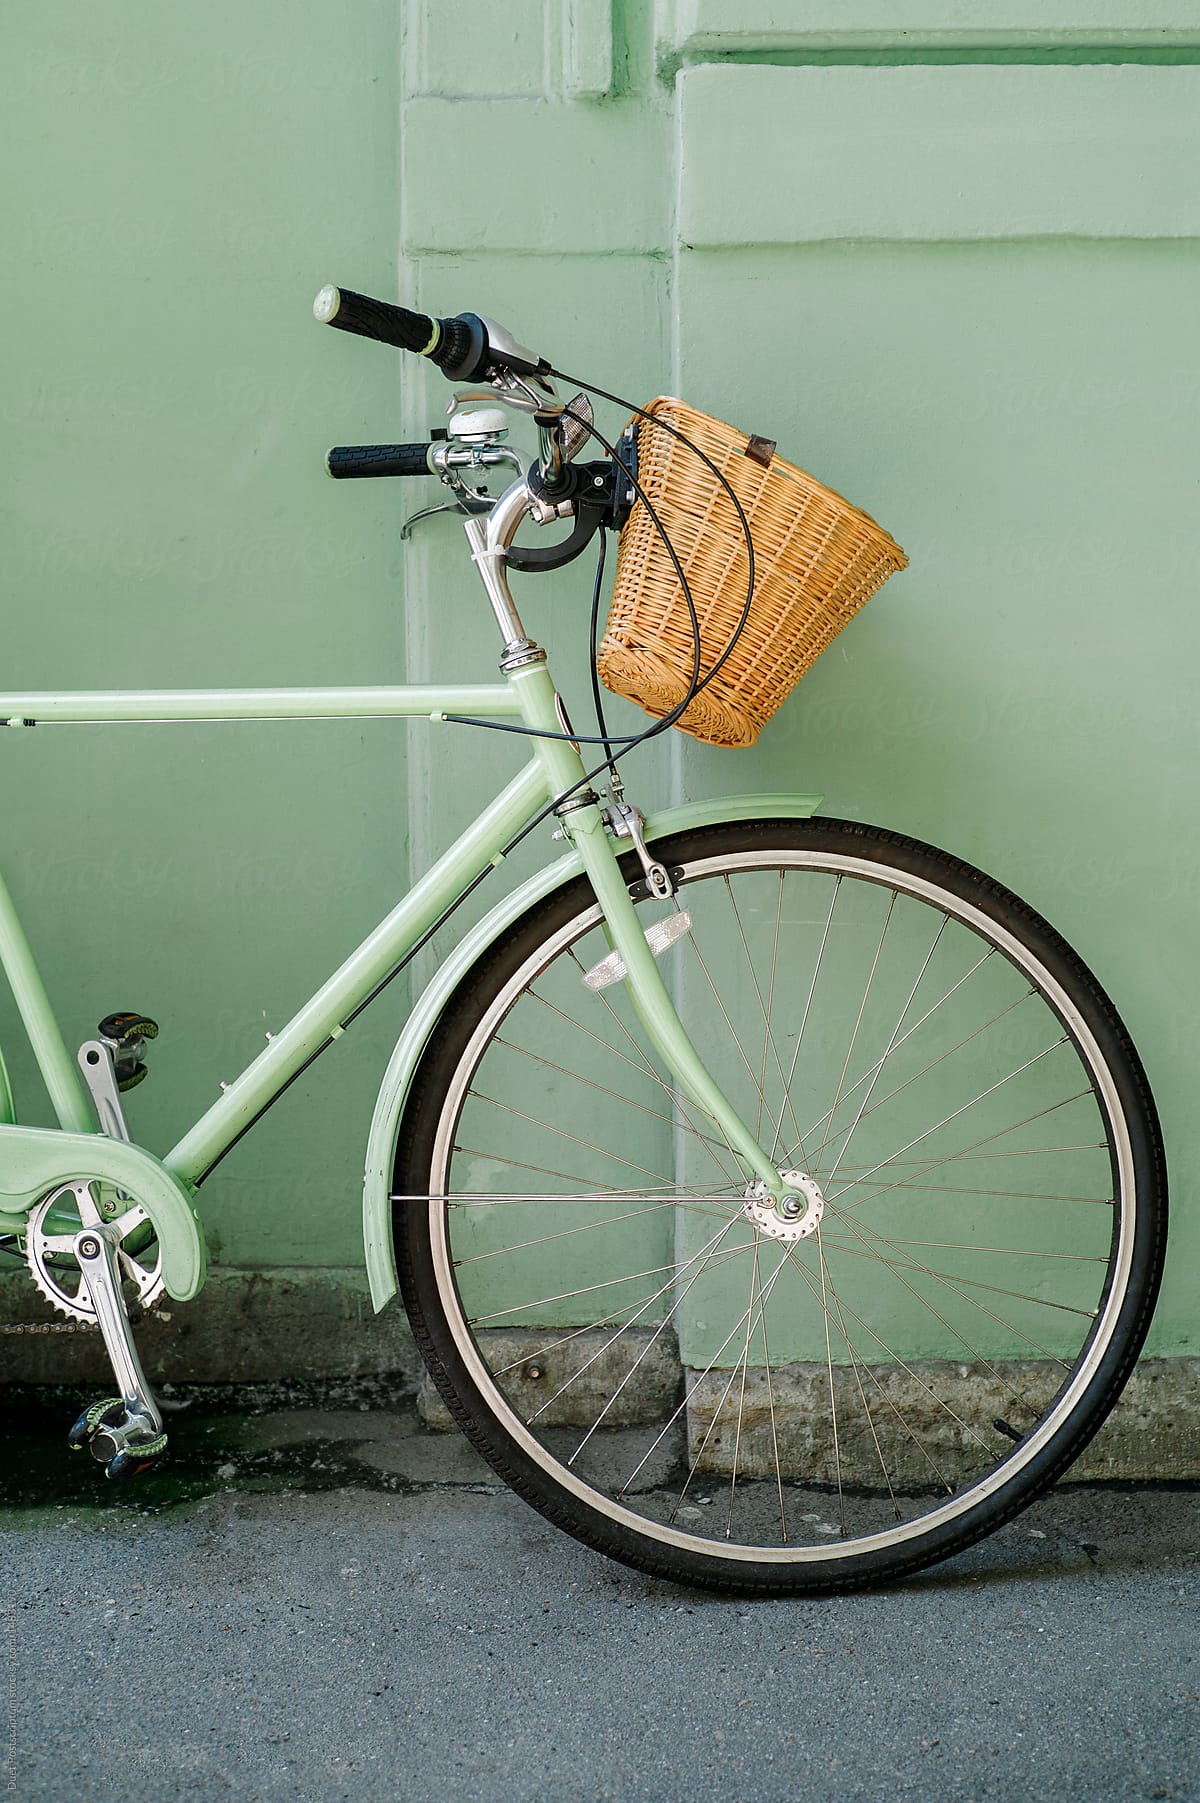 Retro bicycle of mint color